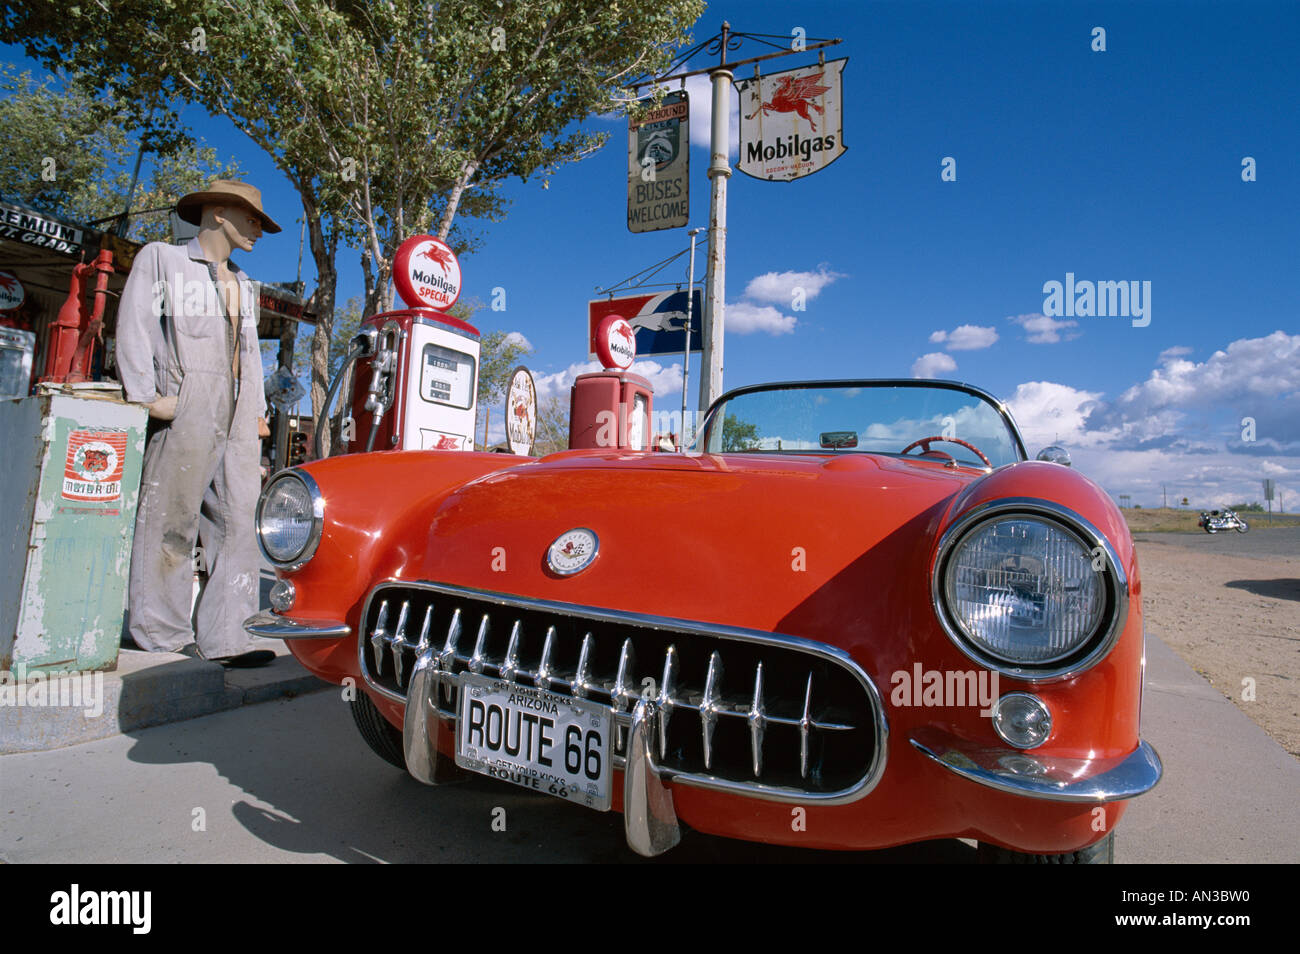 Route 66 / Gas Station with Red Chevrolet Corvette 1957 Car, Hackberry, Arizona, USA Stock Photo